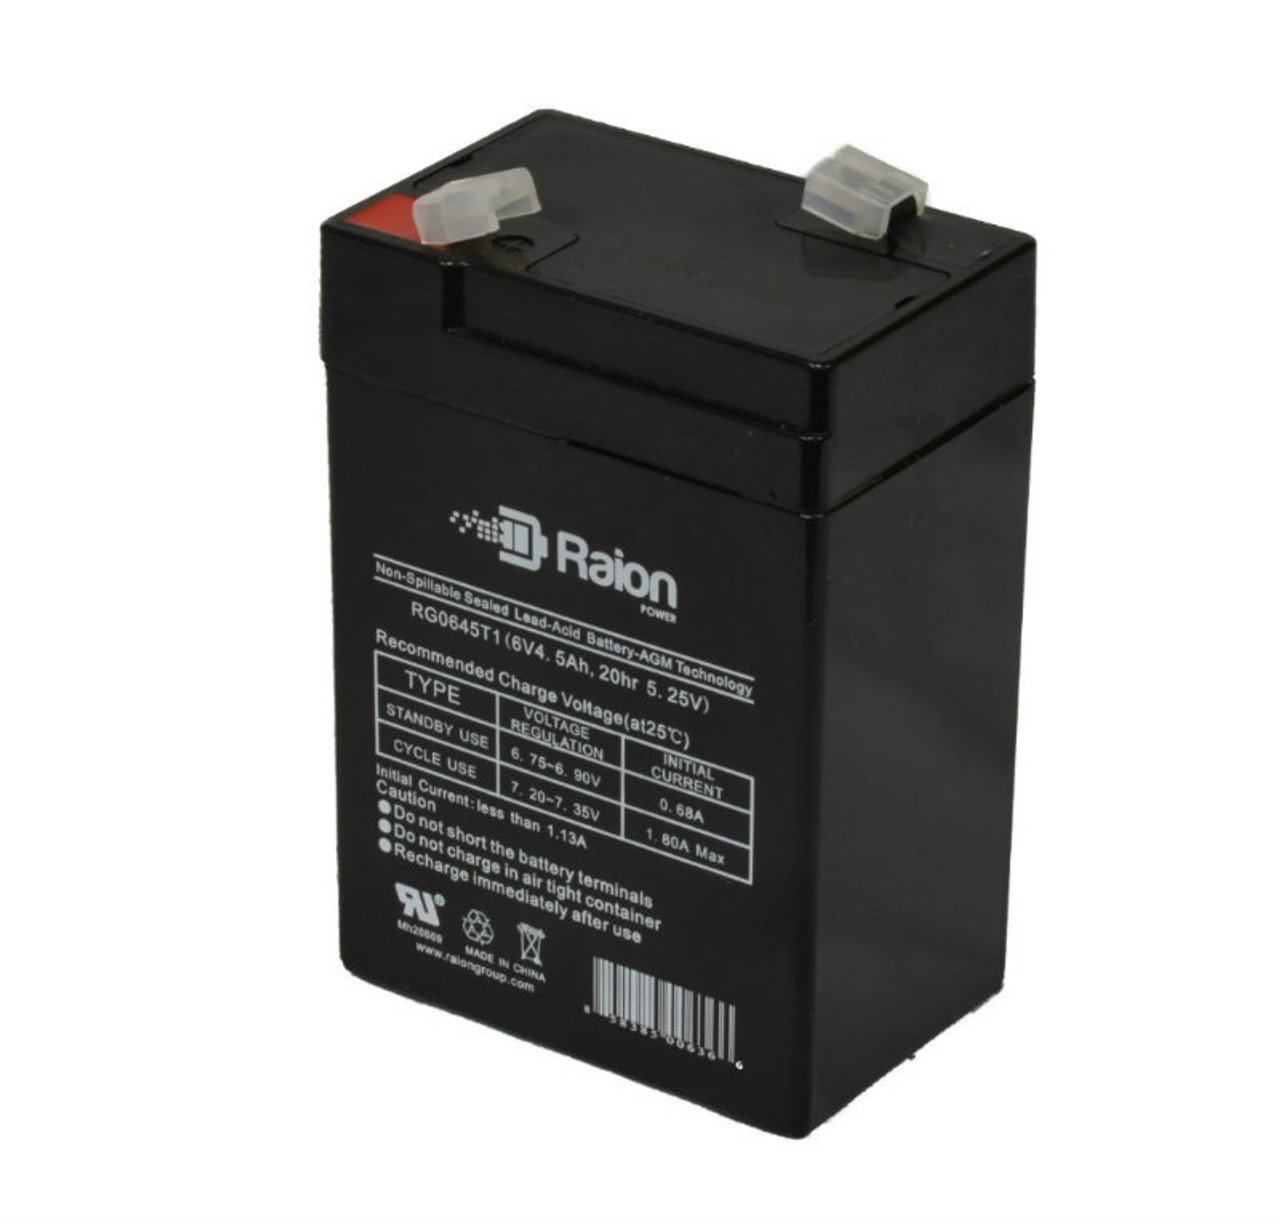 Raion Power RG0645T1 6V 4.5Ah Replacement Battery Cartridge for Enersys NP4.5-6